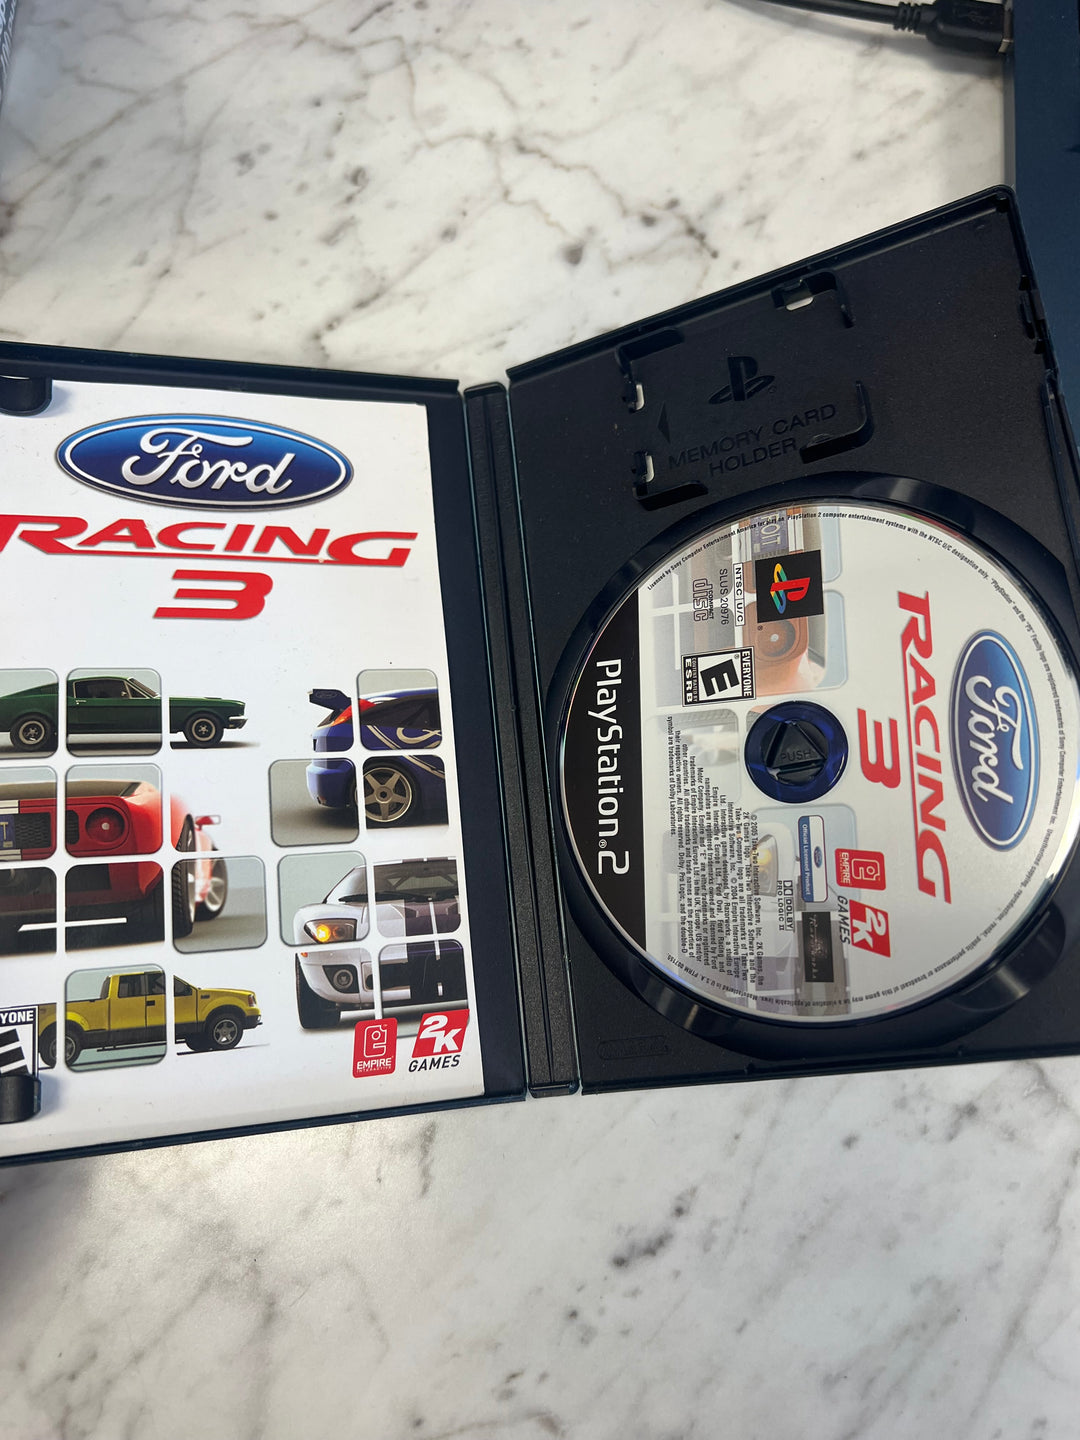 Ford Racing 3 for Playstation 2 PS2 in case. Tested and Working.     DO62924